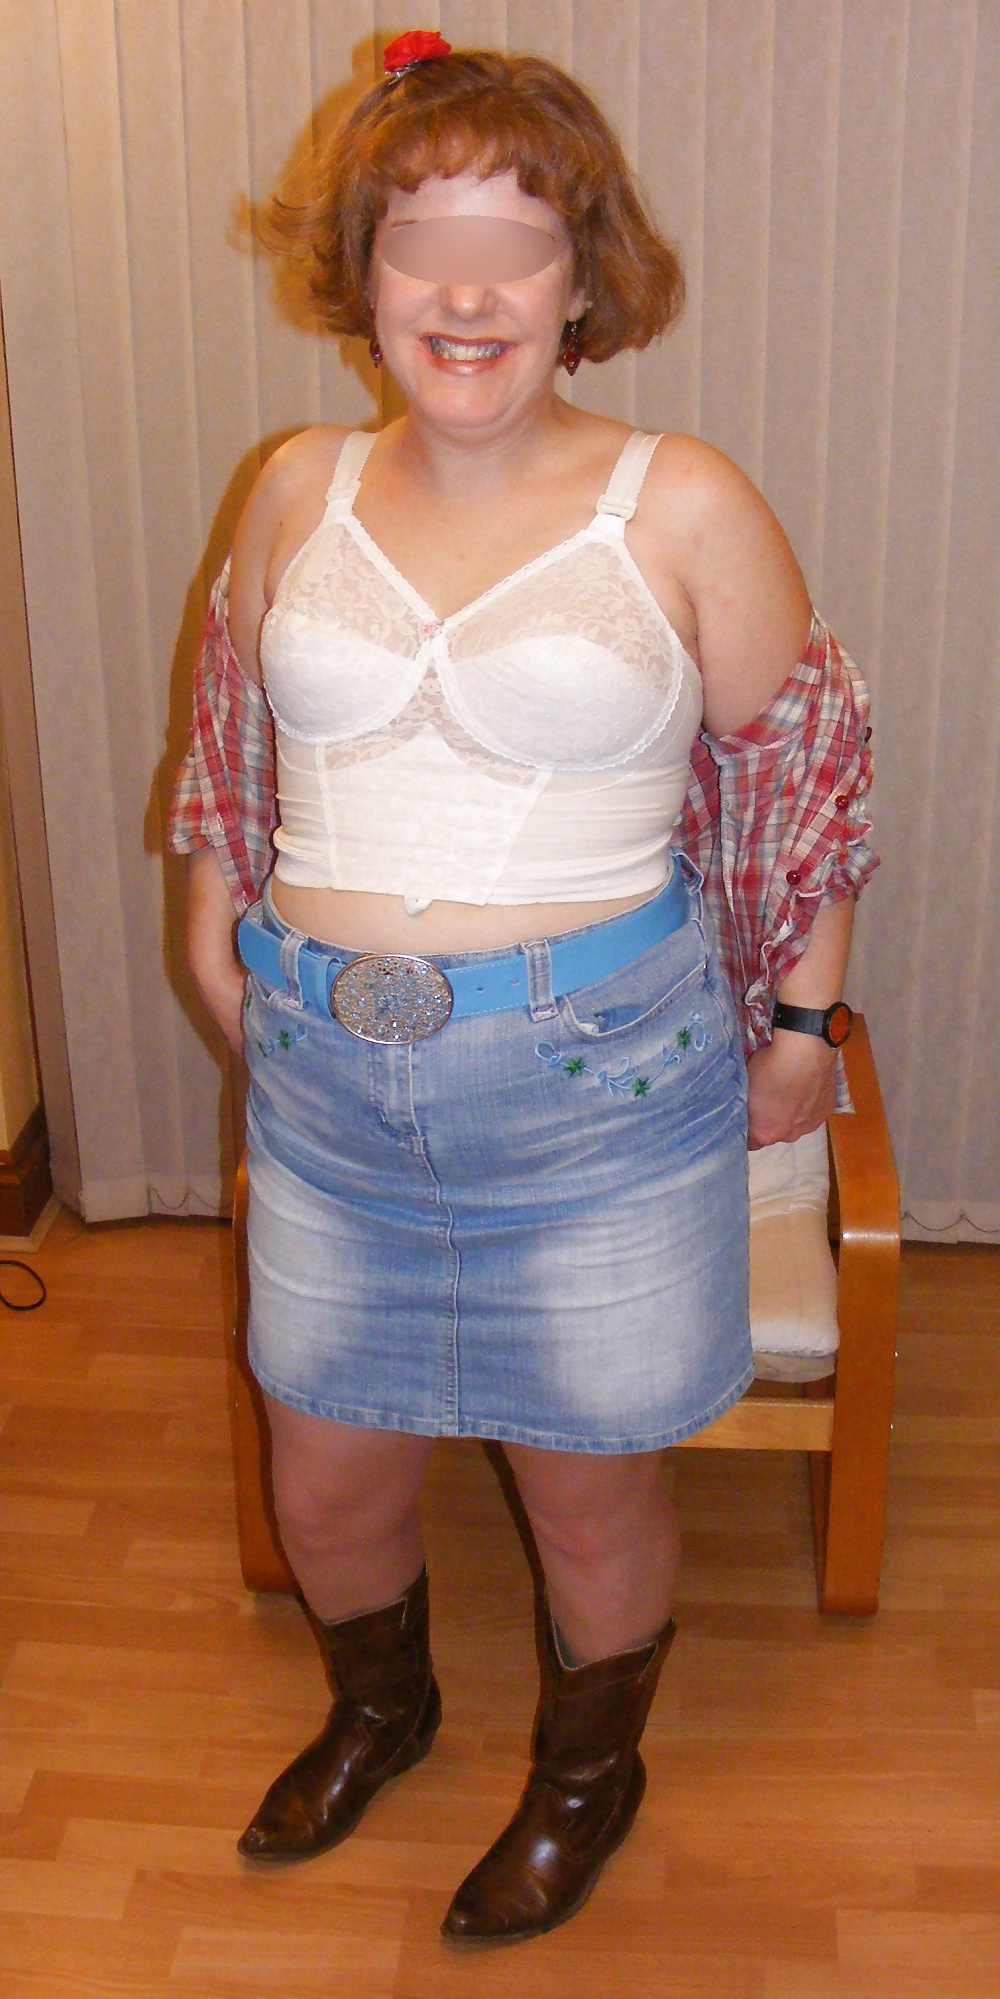 Tights, denim skirt, and big white knickers porn pictures